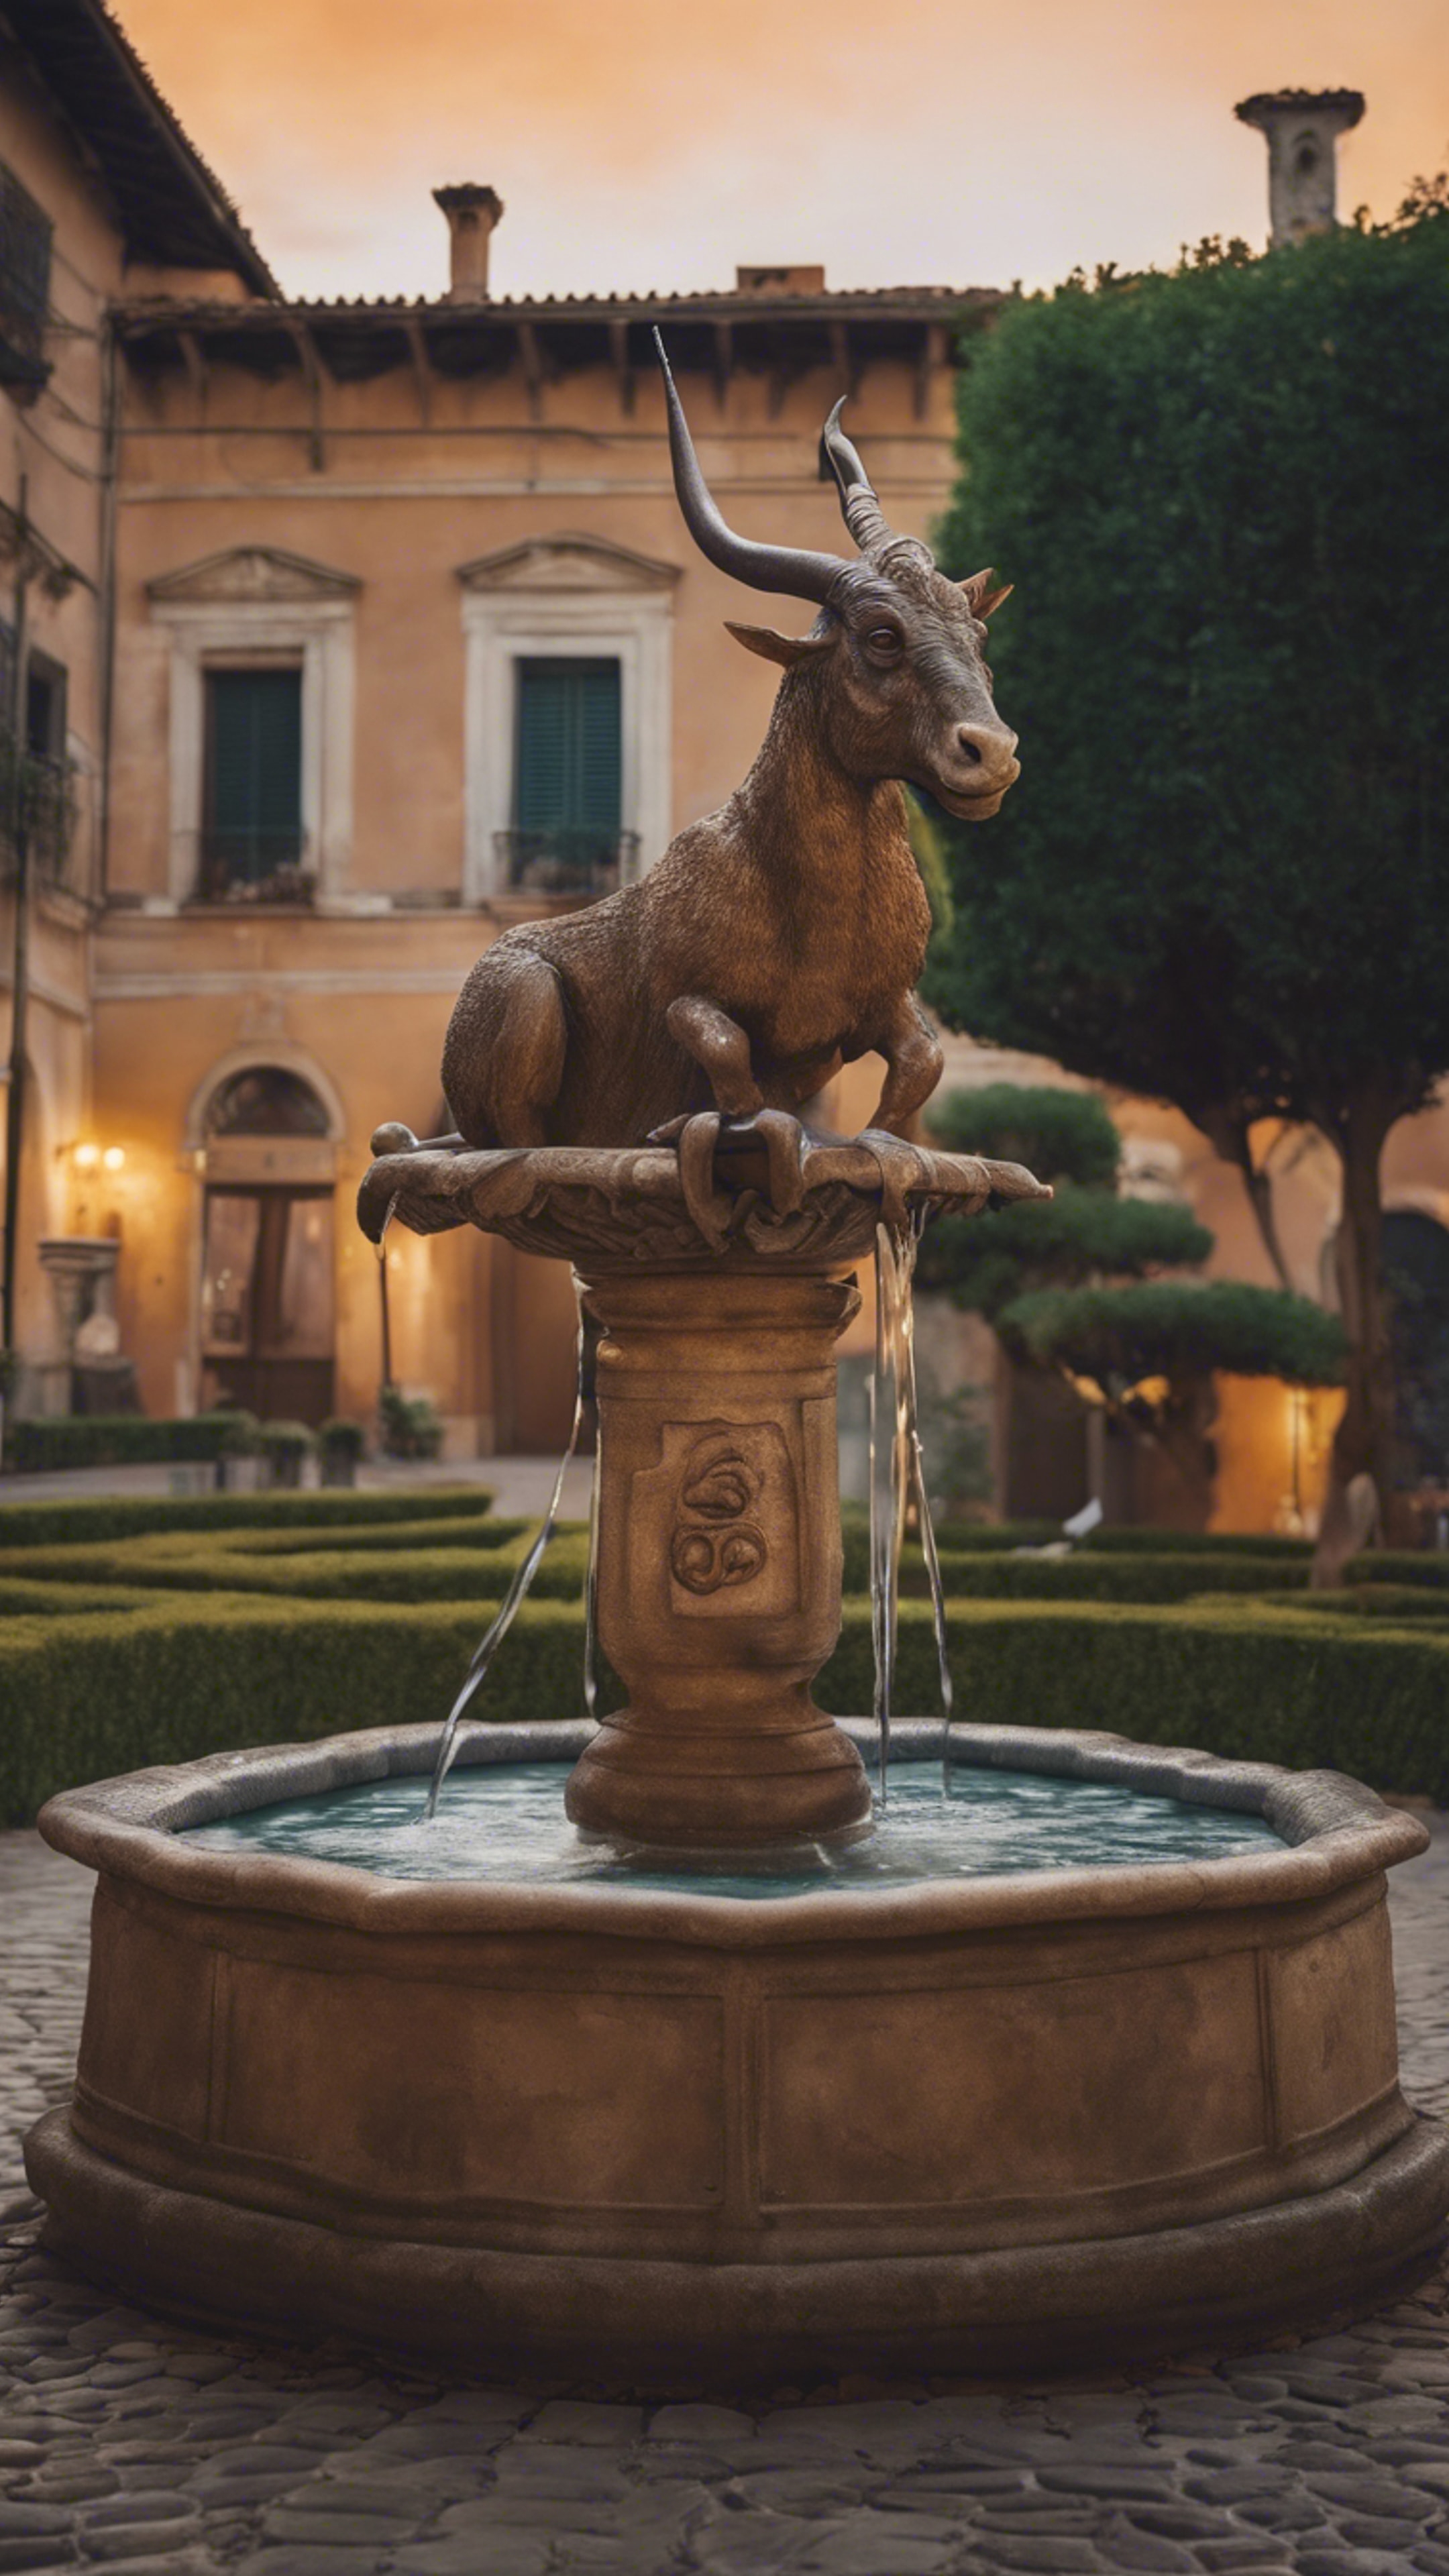 A Capricorn-themed water fountain in the middle of an Italian-style courtyard at dusk. Wallpaper[9dcd863d0fa04895bdb5]